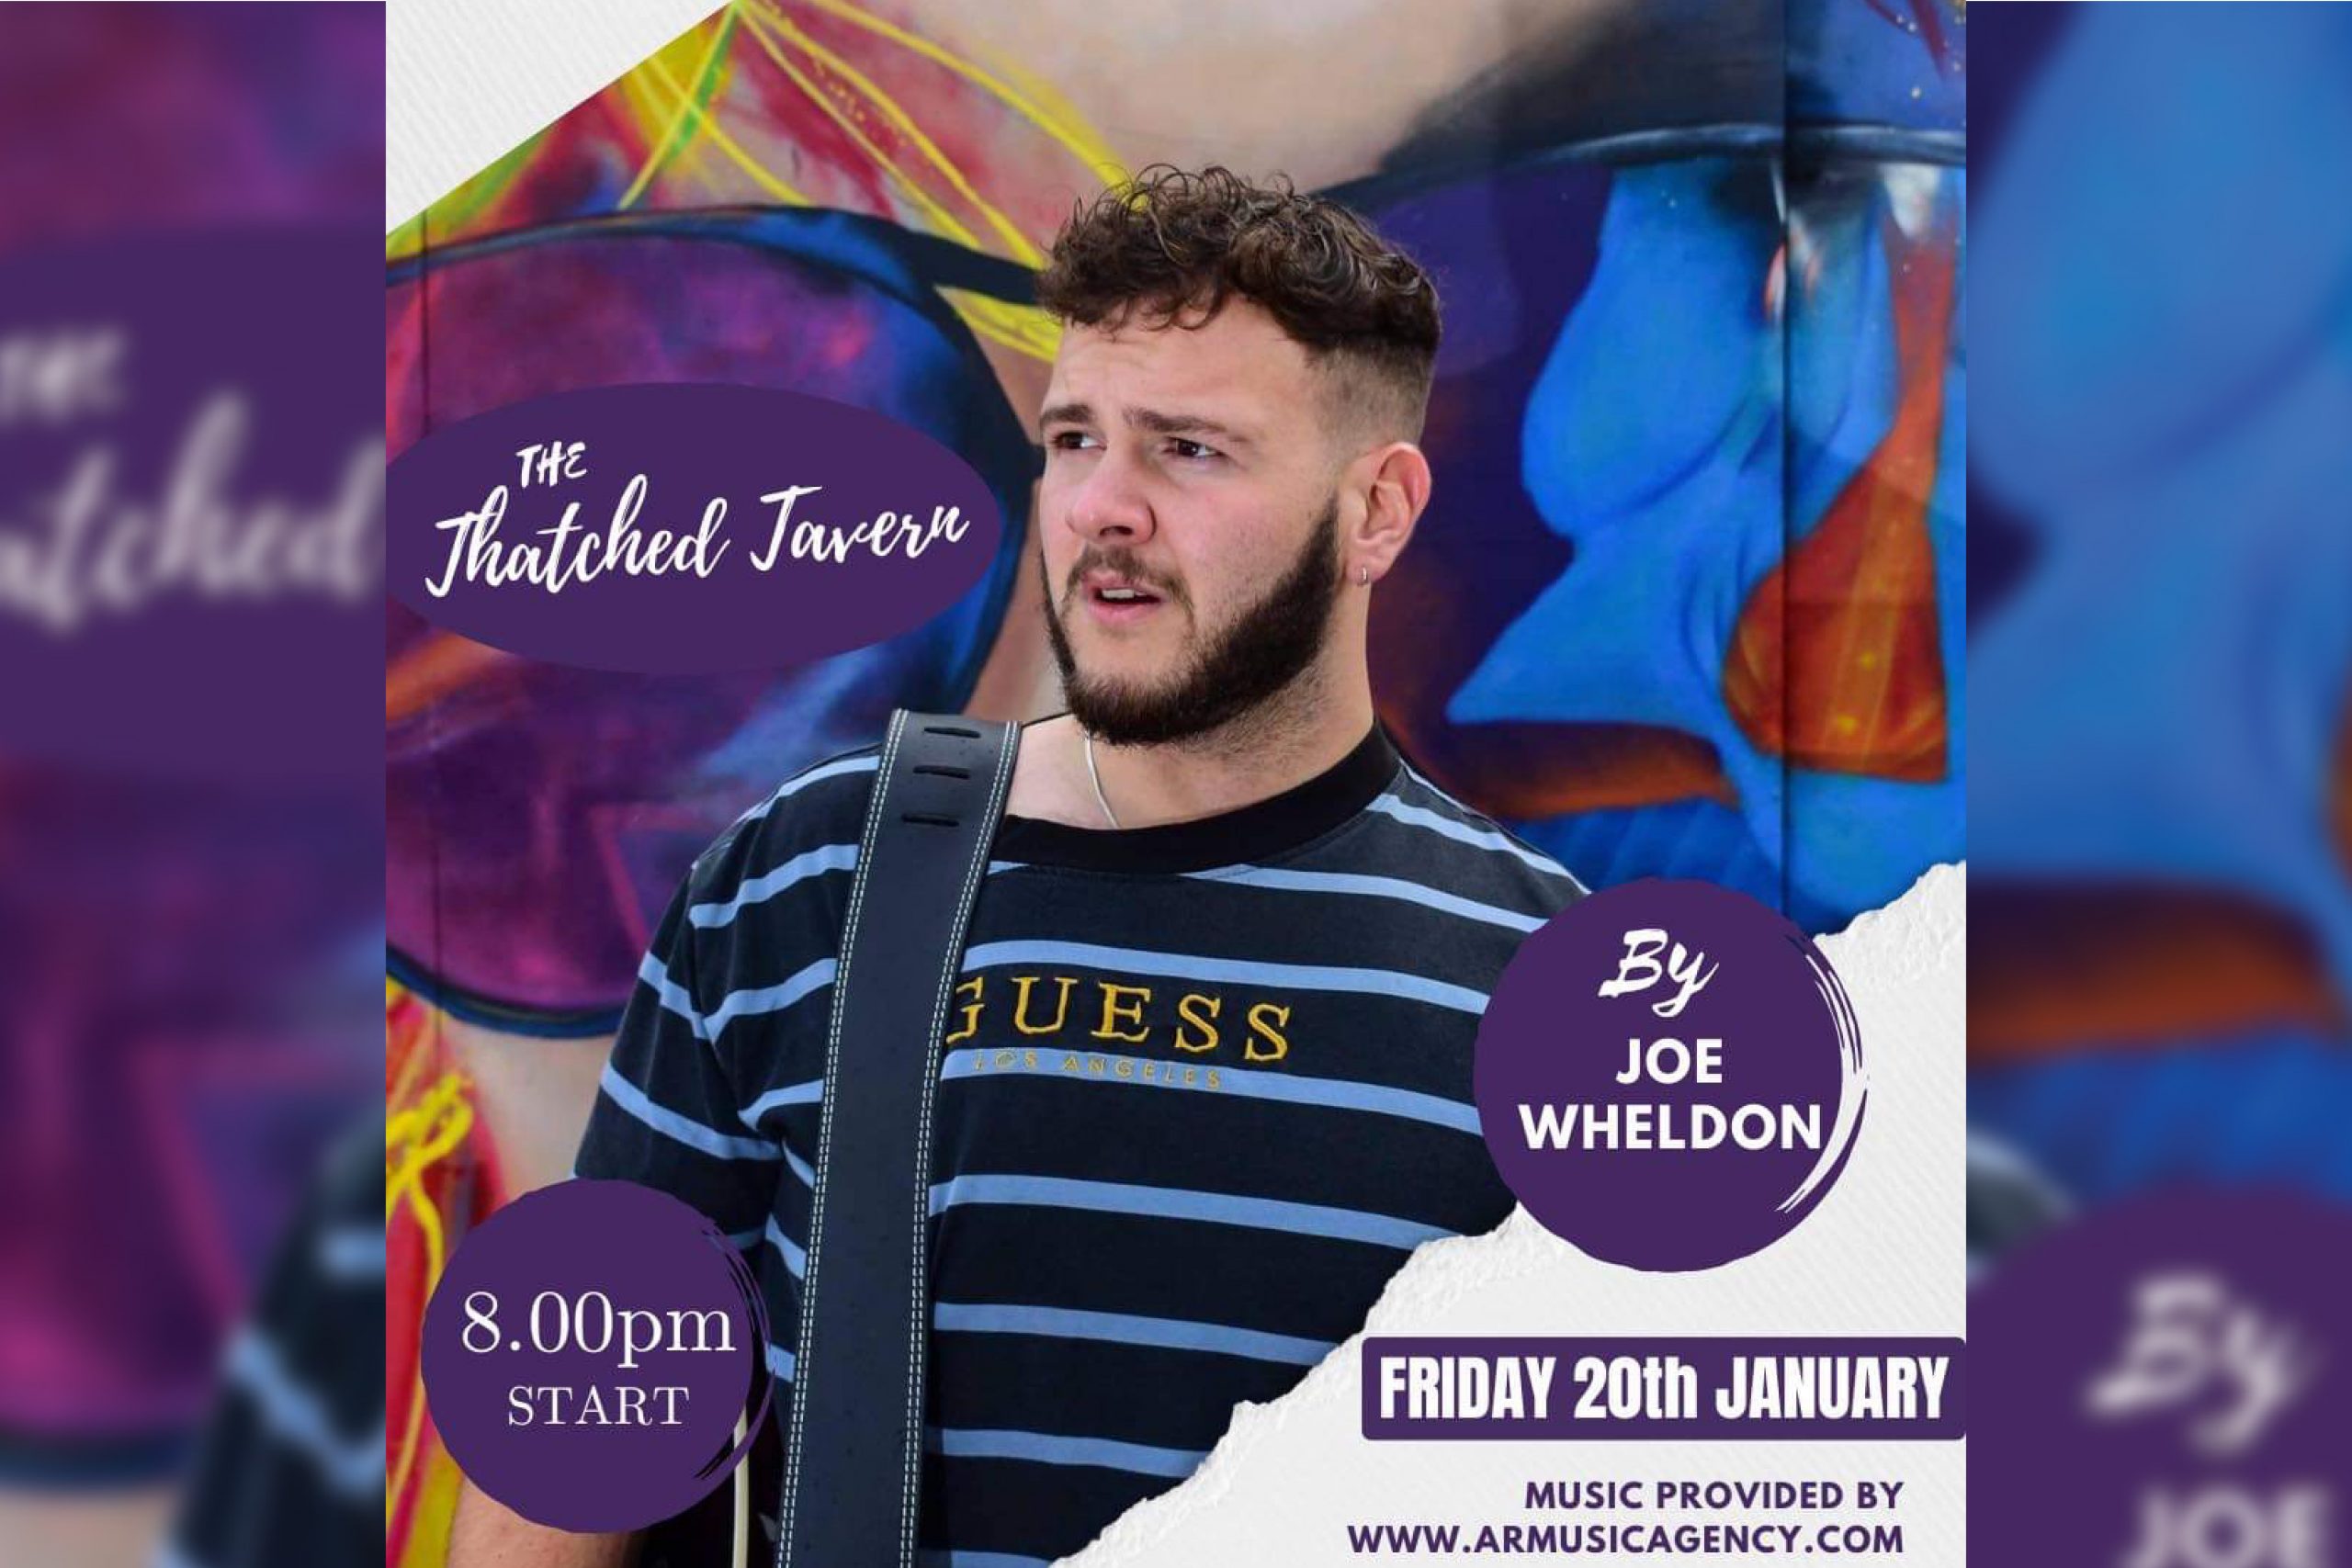 Live music performed by the amazing Joe Wheldon at The Thatched Tavern Honeybourne - Friday 20th January from 8.00pm.